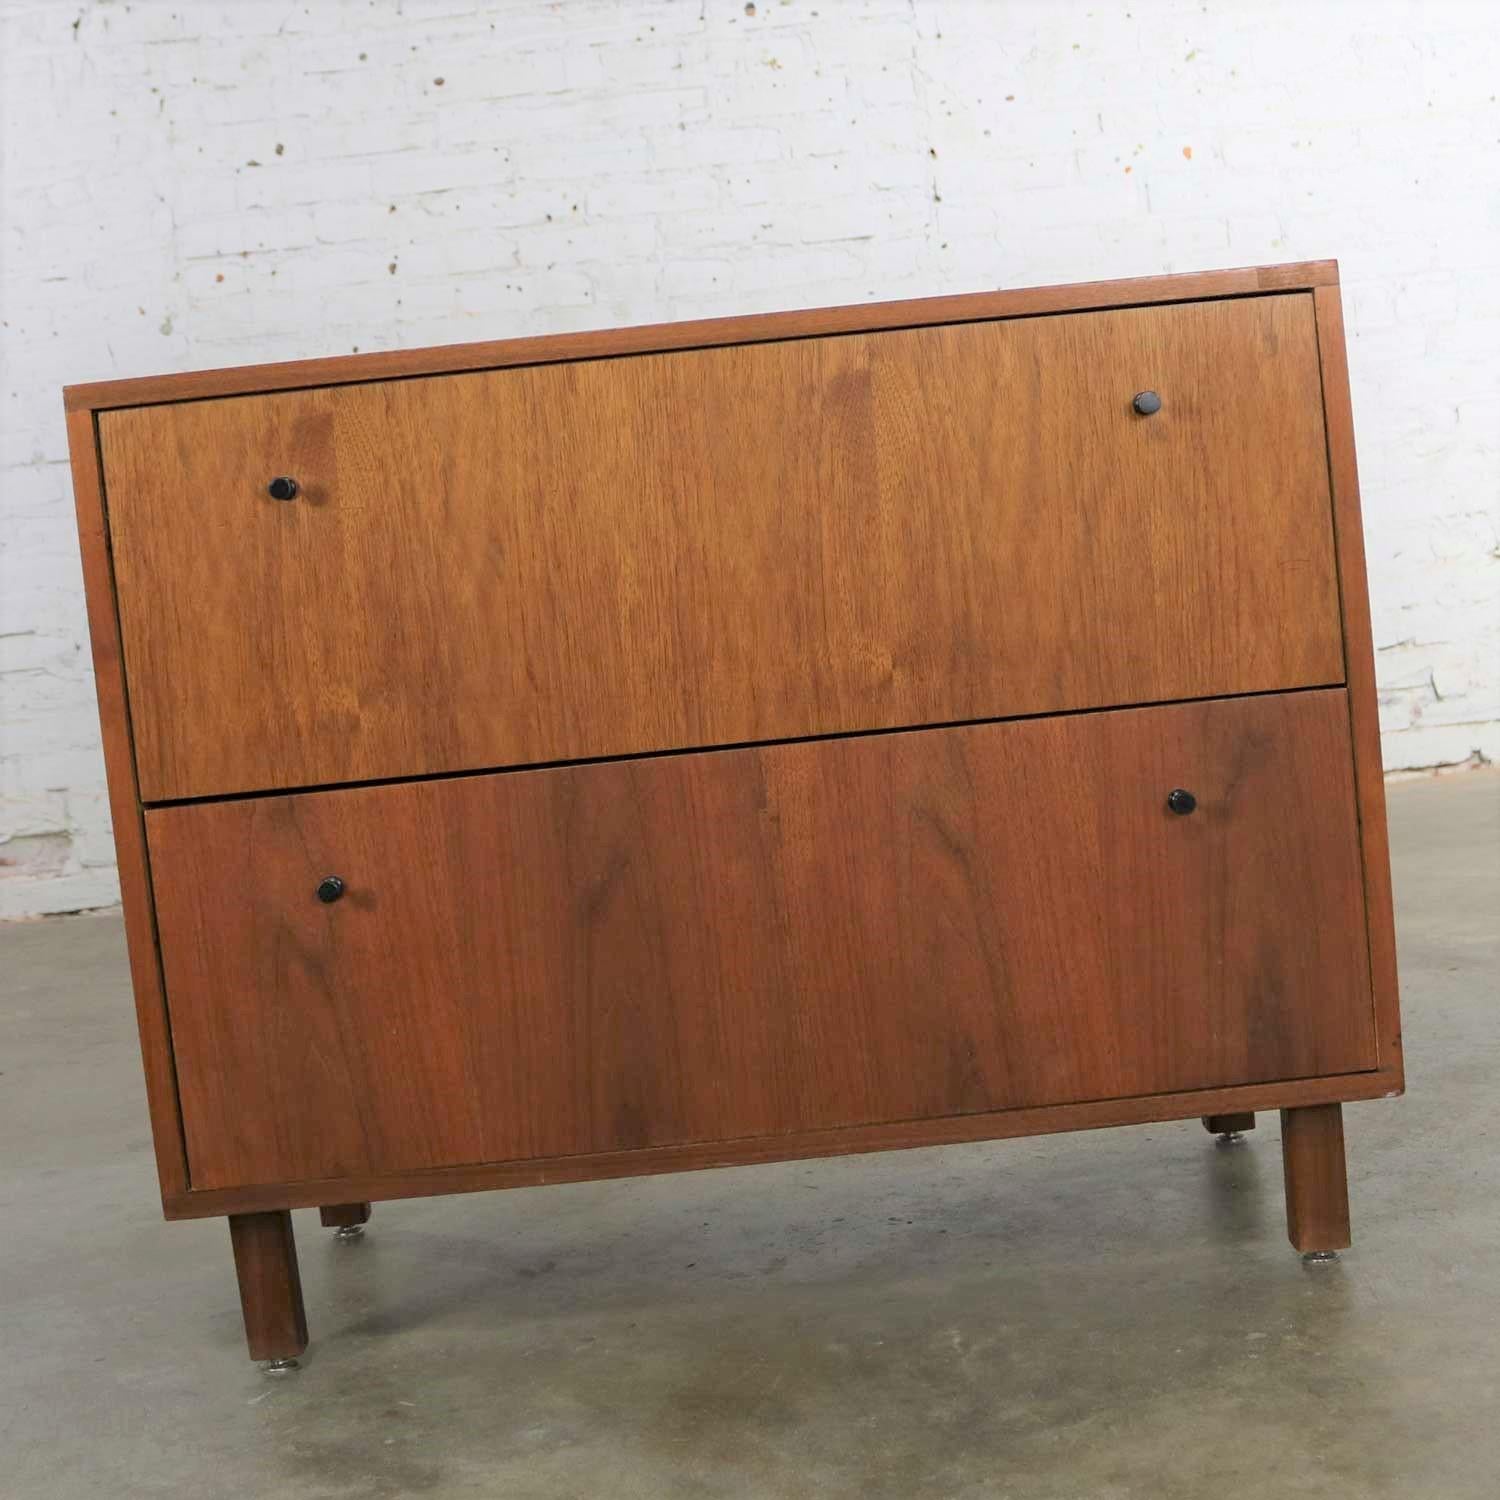 Handsome Mid-Century Modern two-drawer lateral file cabinet in walnut by Hardwood House Inc. of Rochester, New York. It is very reminiscent of cabinets by both George Nelson and Jens Risom. It is in fabulous vintage condition overall. The top drawer